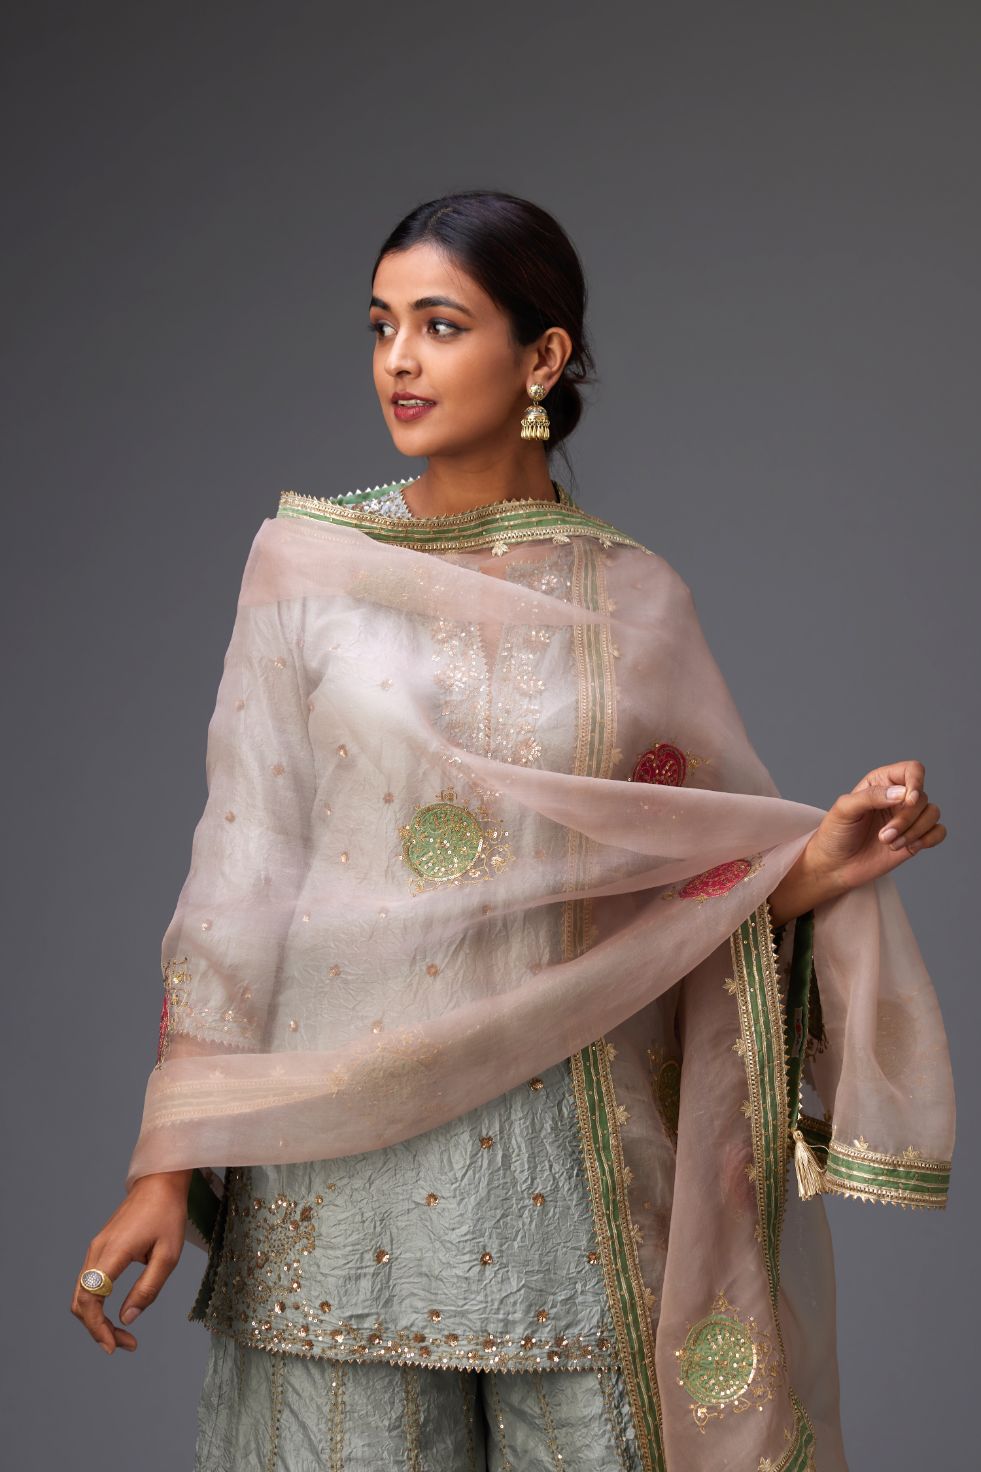 Old rose silk organza dupatta highlighted with all-over embroidered boota and contrast colored border running along all edges.